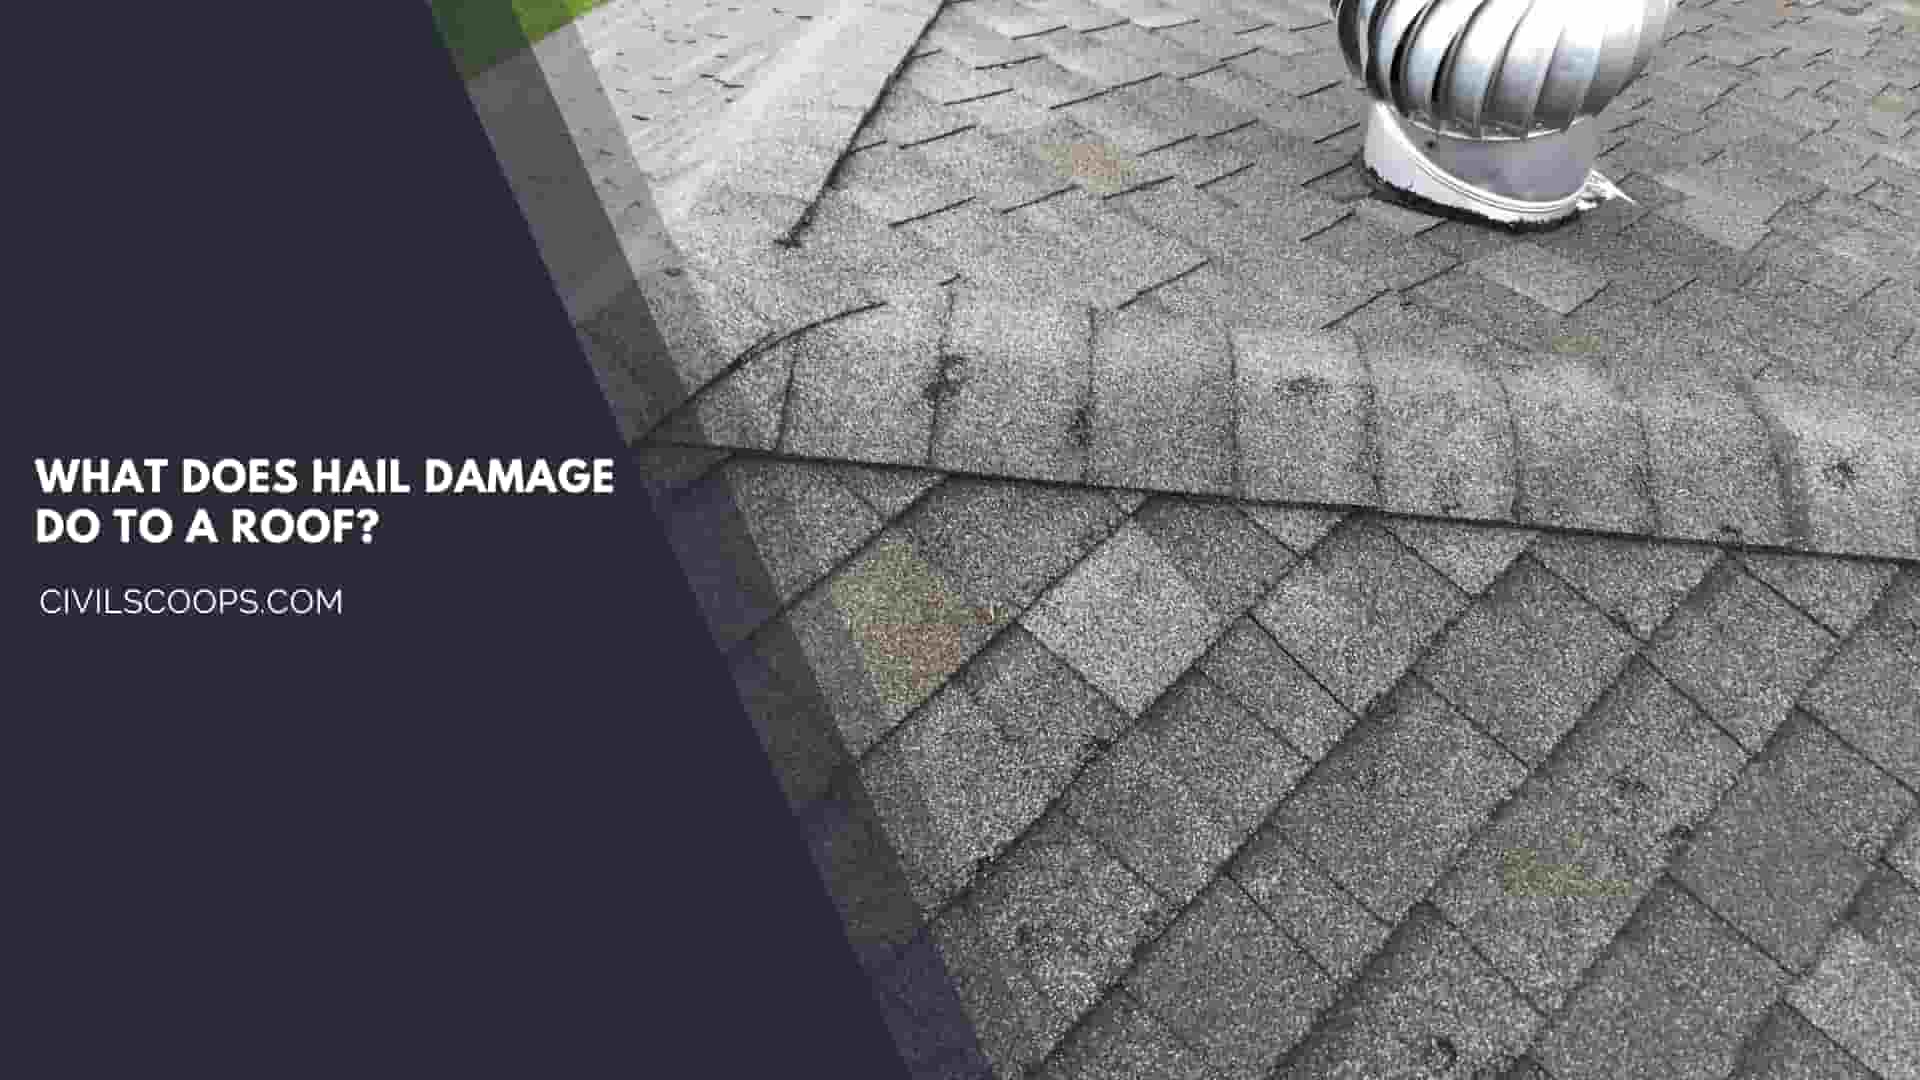 What Does Hail Damage Do to a Roof?